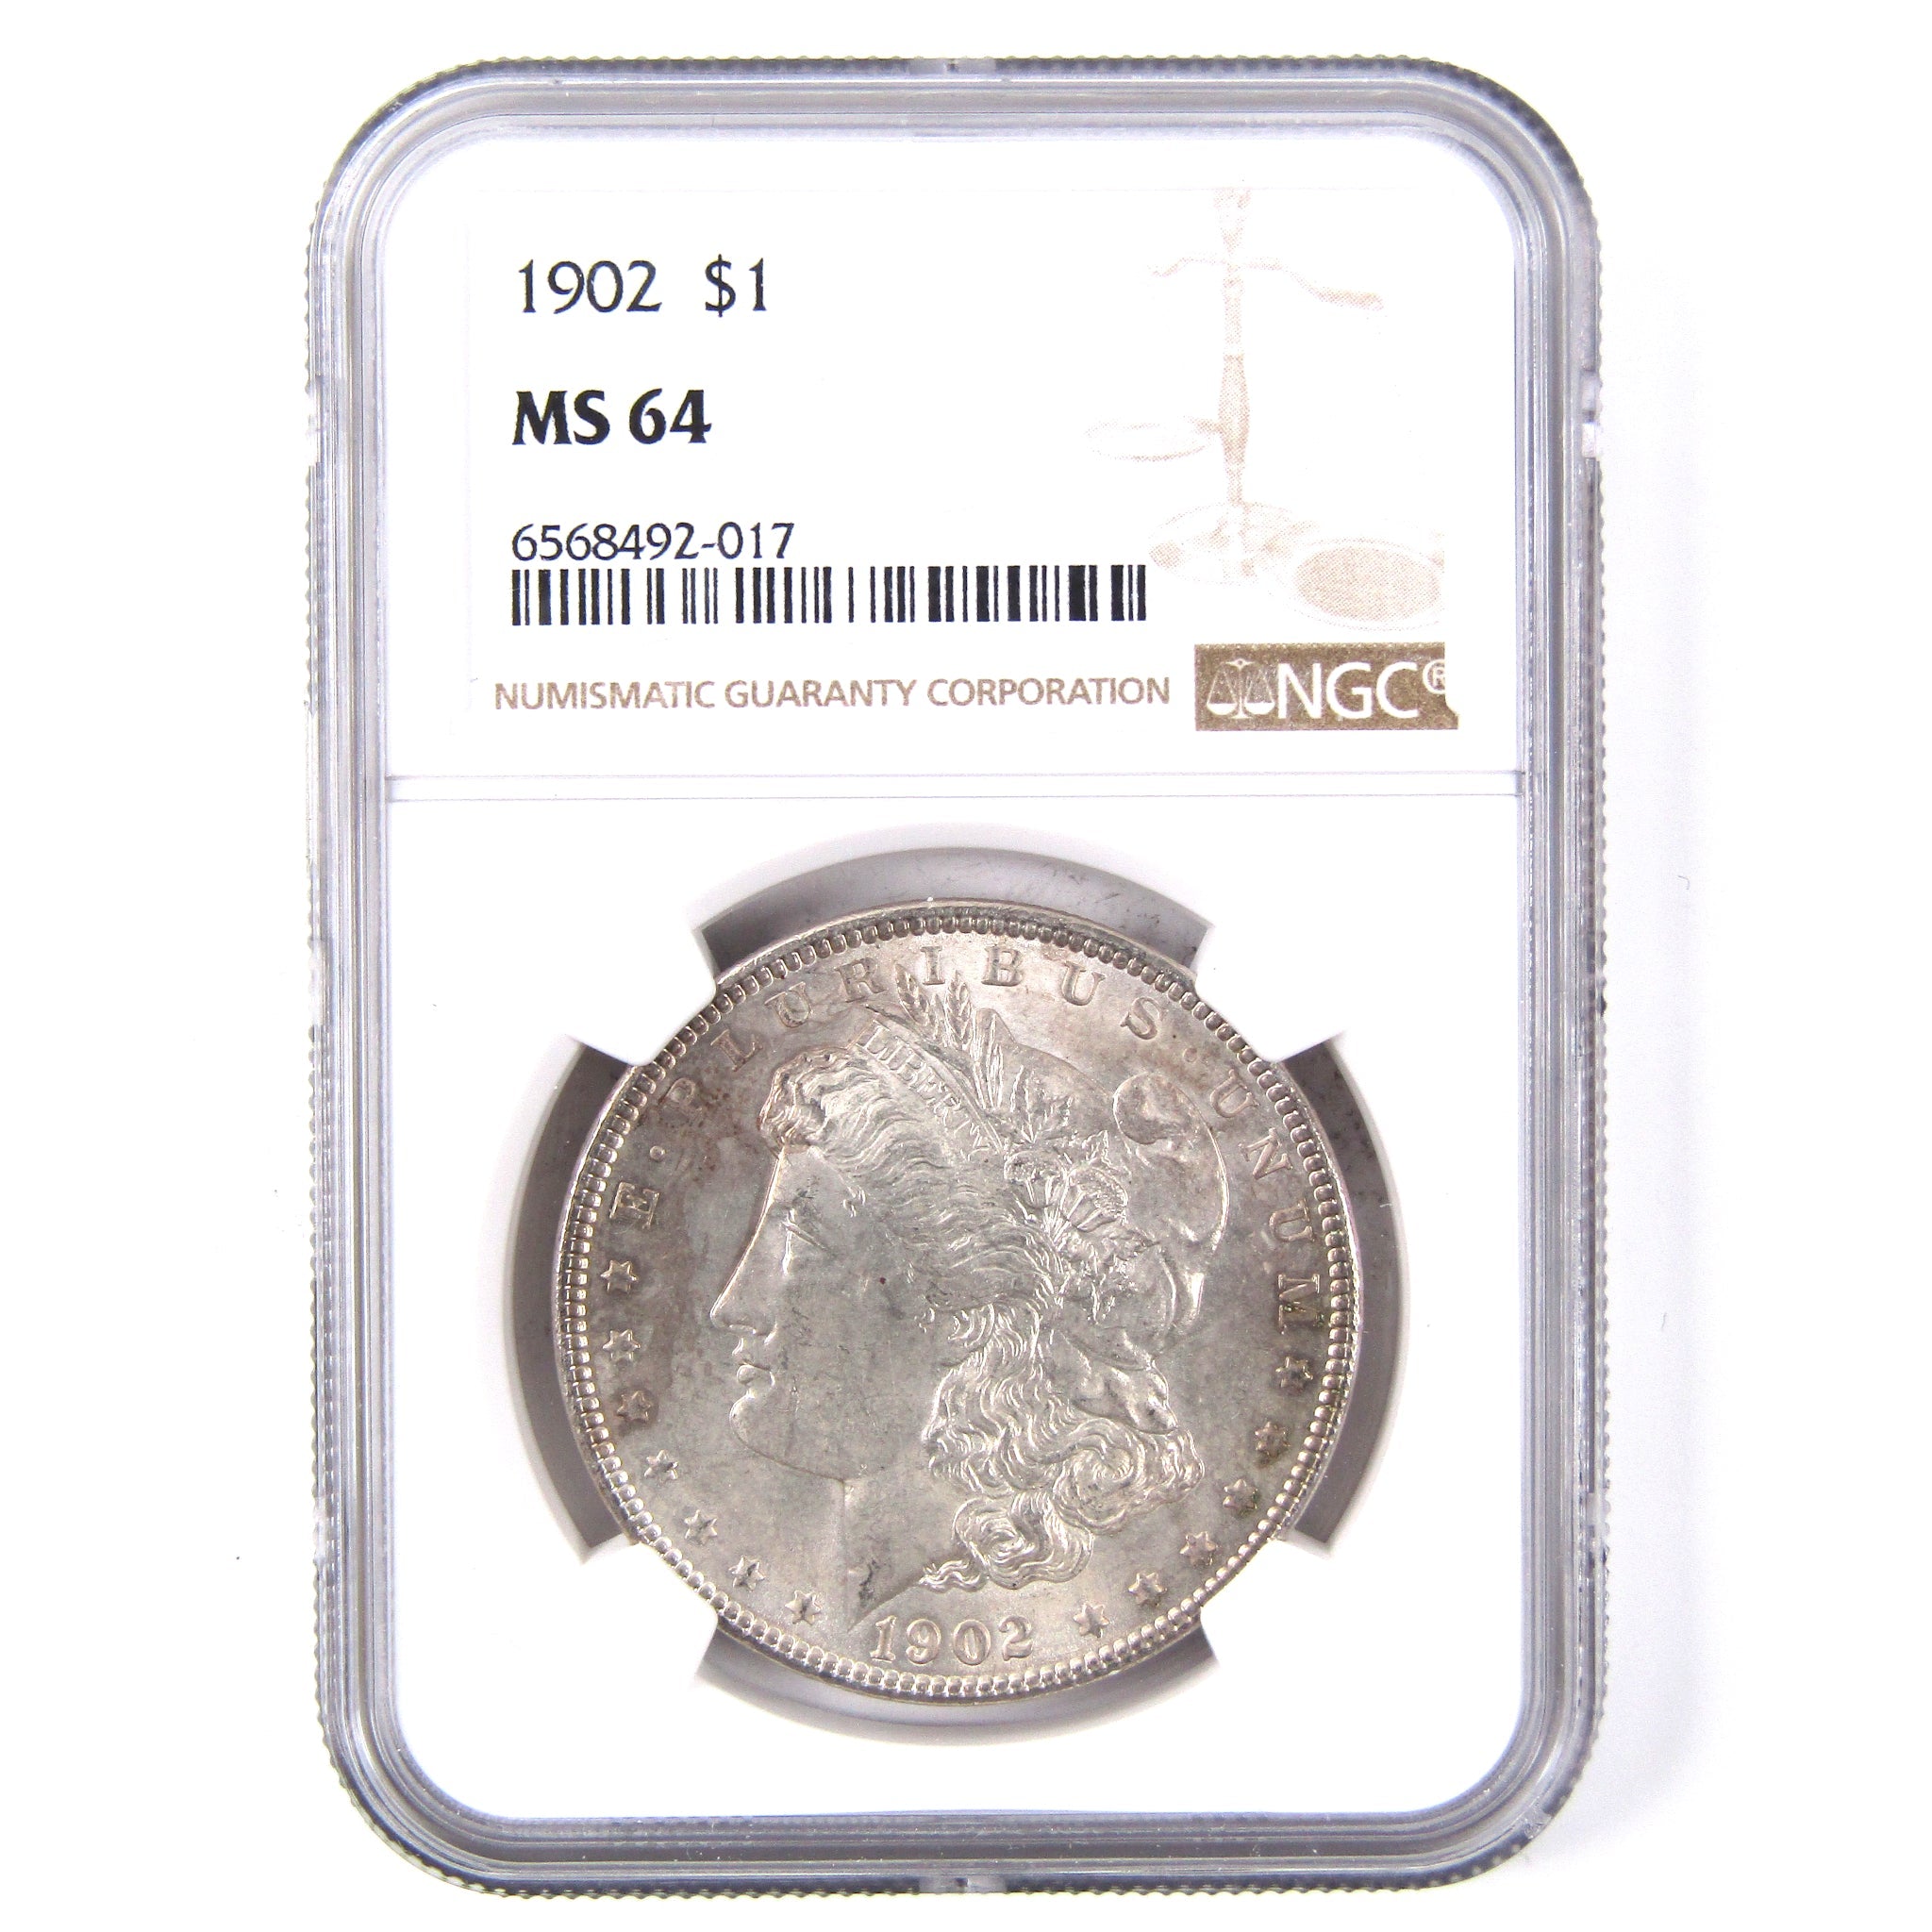 1902 Morgan Dollar MS 64 NGC 90% Silver Uncirculated Coin SKU:I2528 - Morgan coin - Morgan silver dollar - Morgan silver dollar for sale - Profile Coins &amp; Collectibles